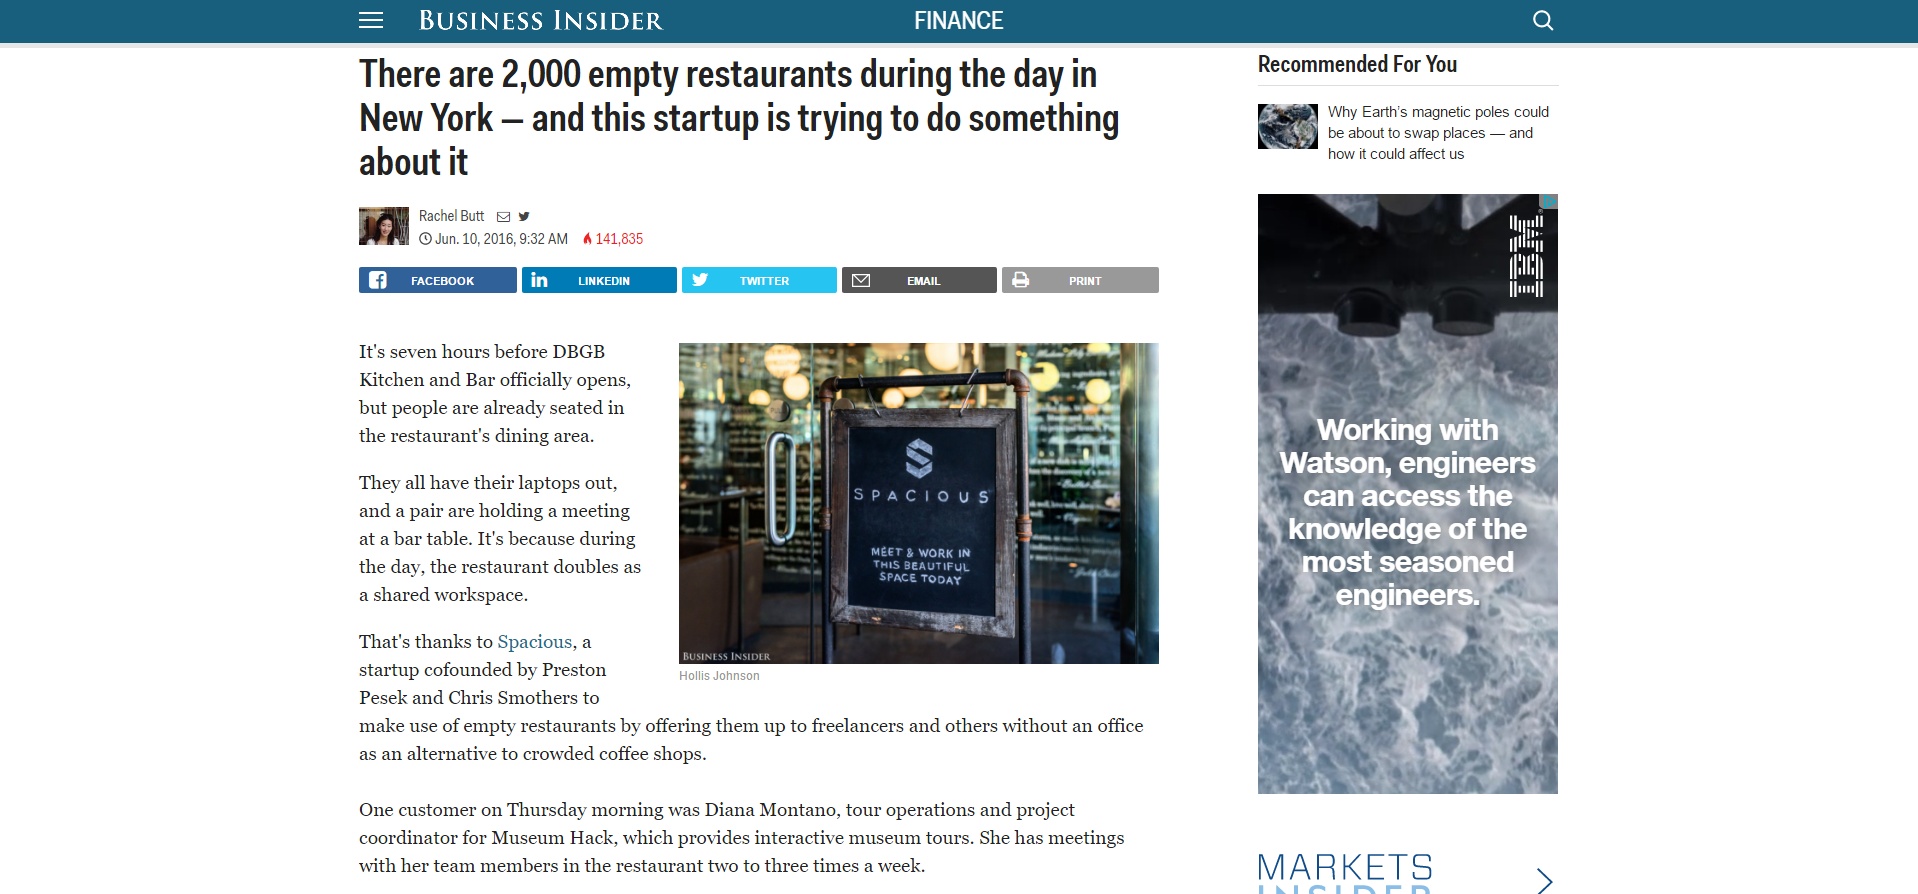 Business Insider Reports on Restaurants Opening Coworking Spaces